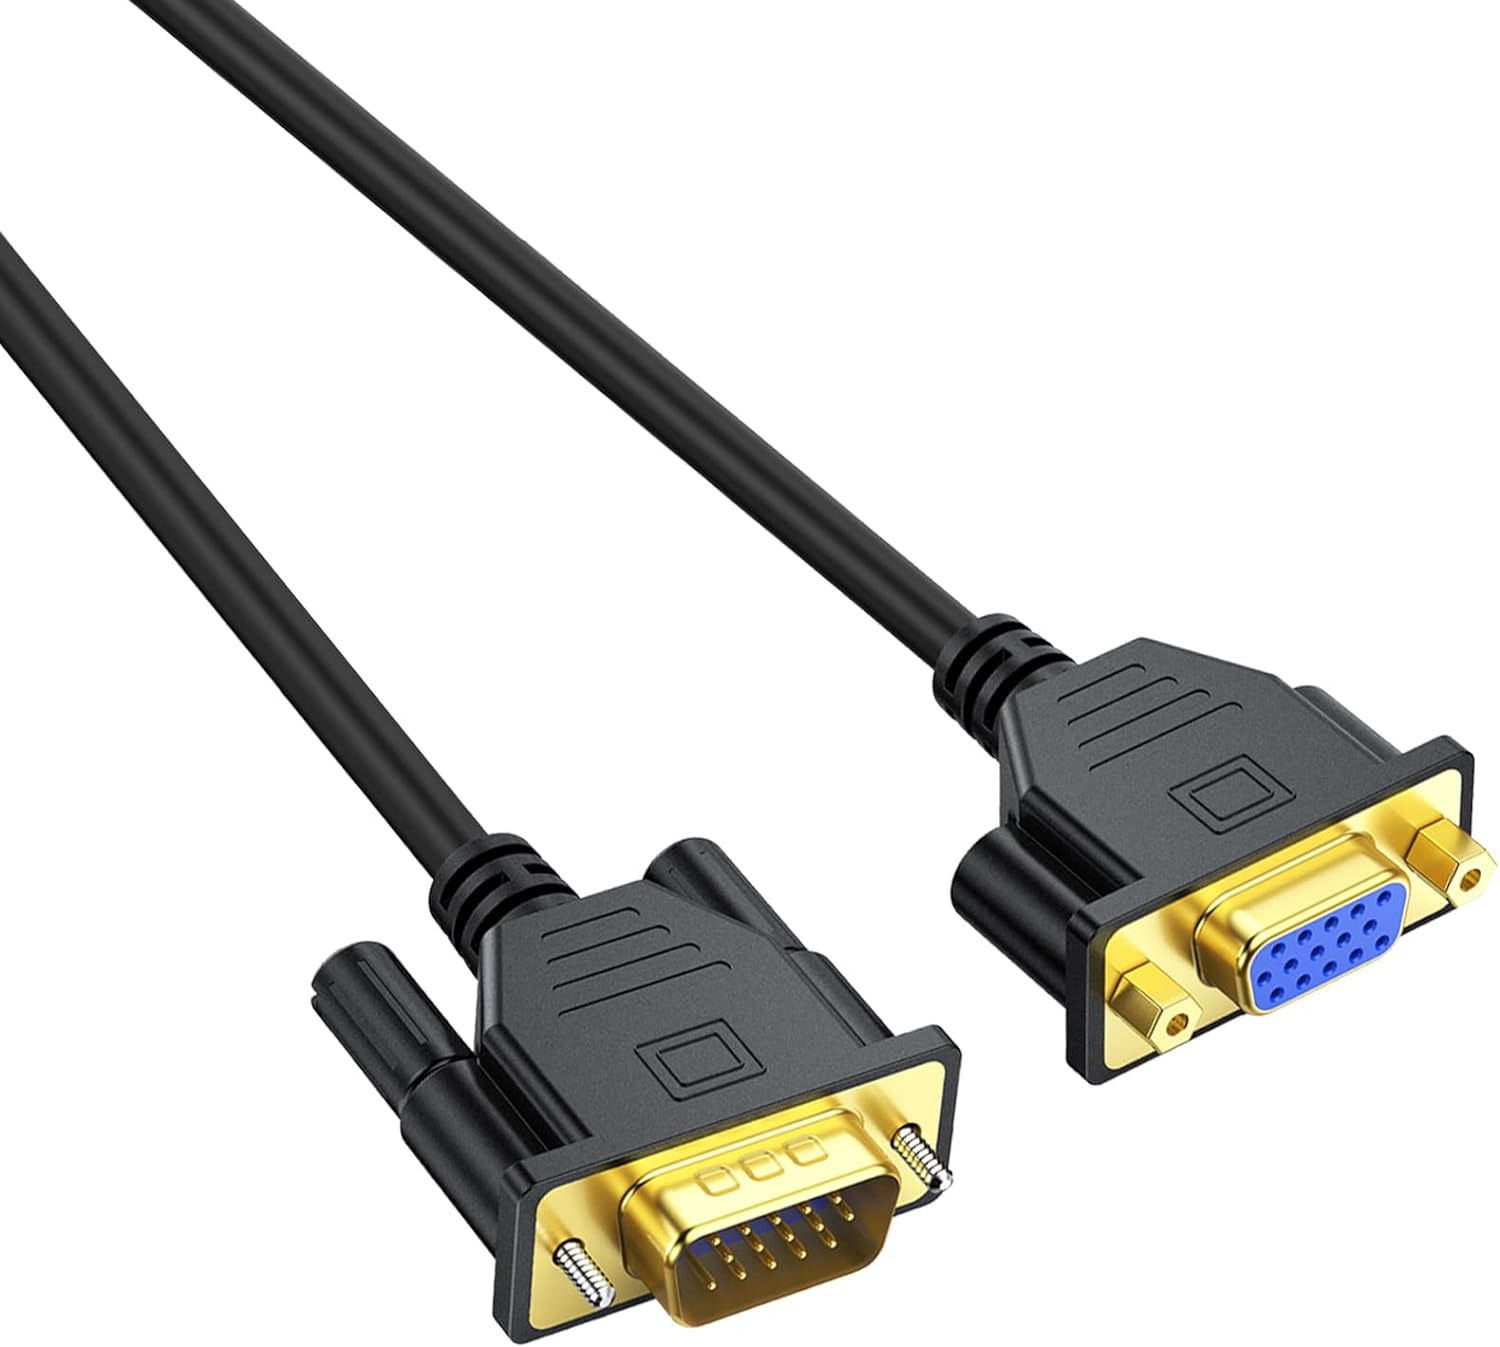 VGA Extension Cable 3 Feet, VGA Cable Male to Female - 15 Pin VGA Extender Cord